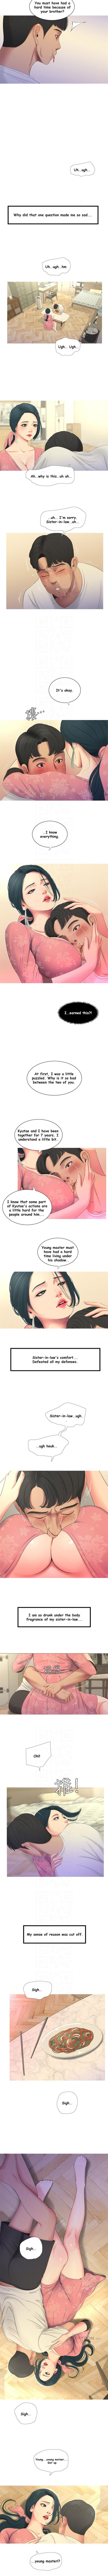 One's In-Laws Virgins Chapter 1-13 (Ongoing) [English] 30